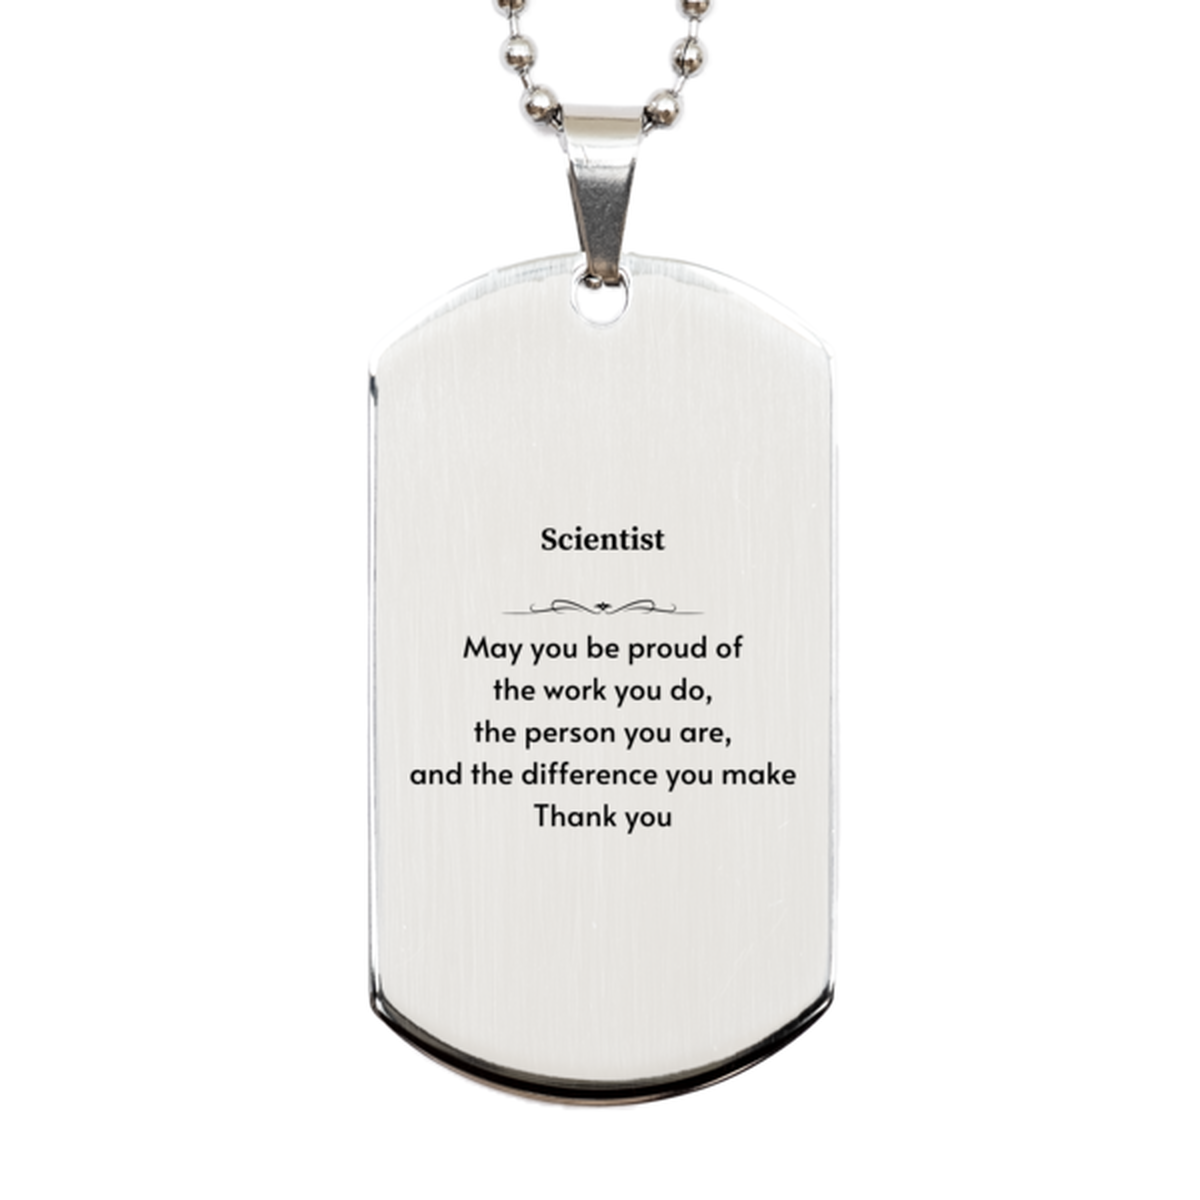 Heartwarming Silver Dog Tag Retirement Coworkers Gifts for Scientist, Scientist May You be proud of the work you do, the person you are Gifts for Boss Men Women Friends